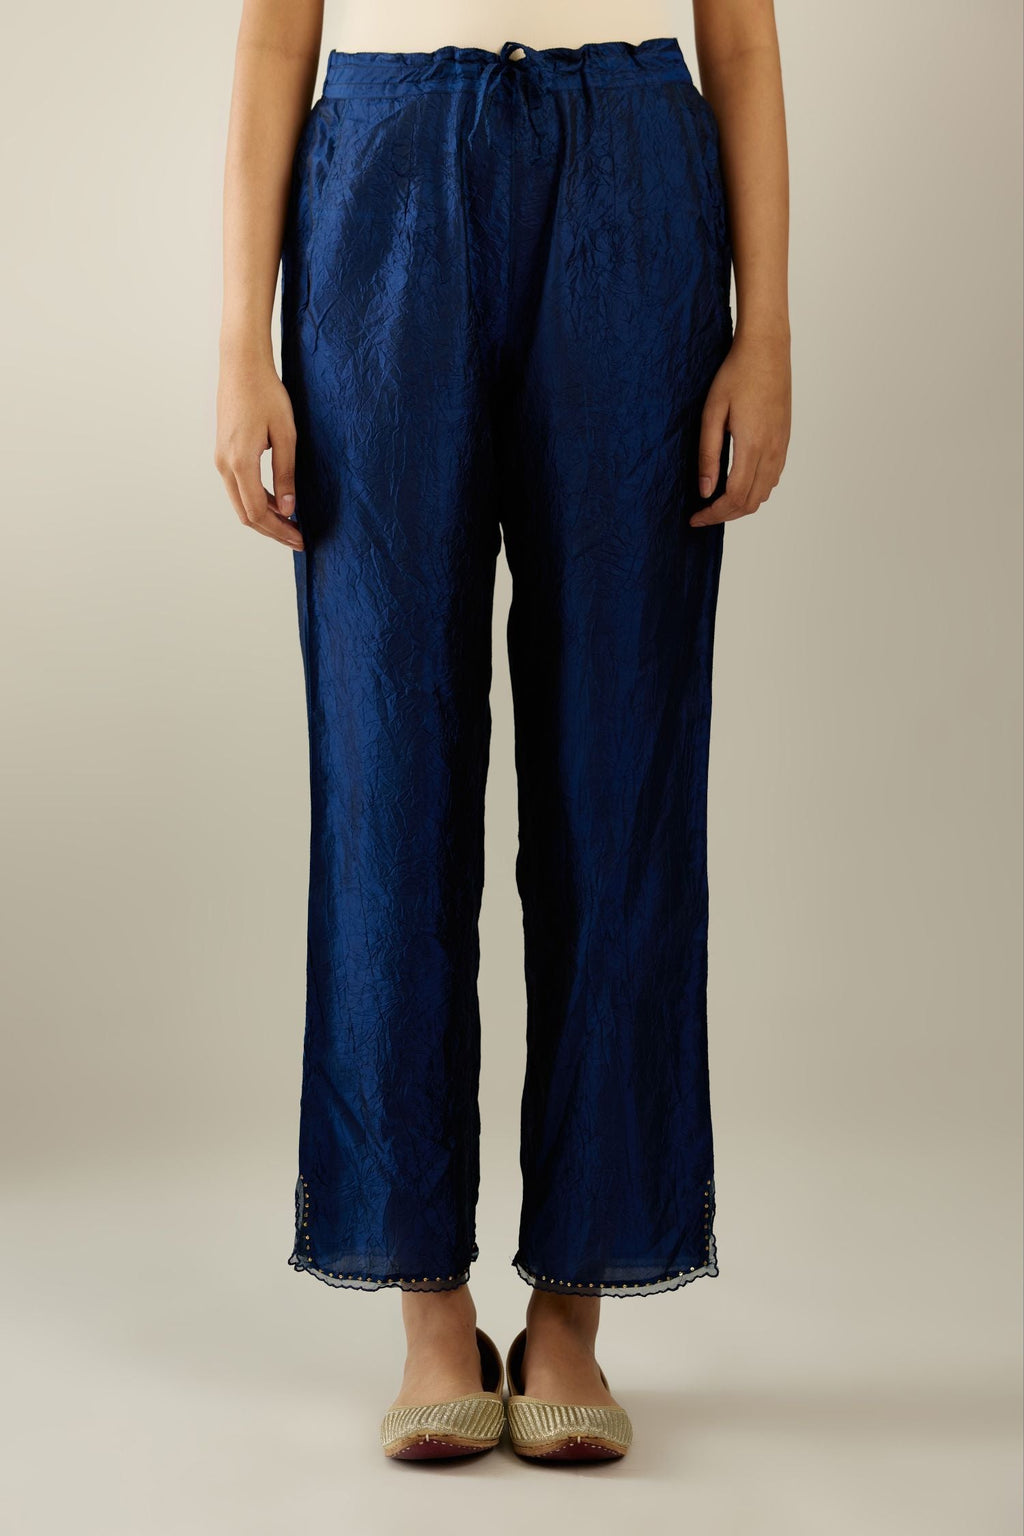 Navy blue hand crushed silk straight pants with scalloped and embroidered organza at edges and detailed with a single line of sequins at hem.